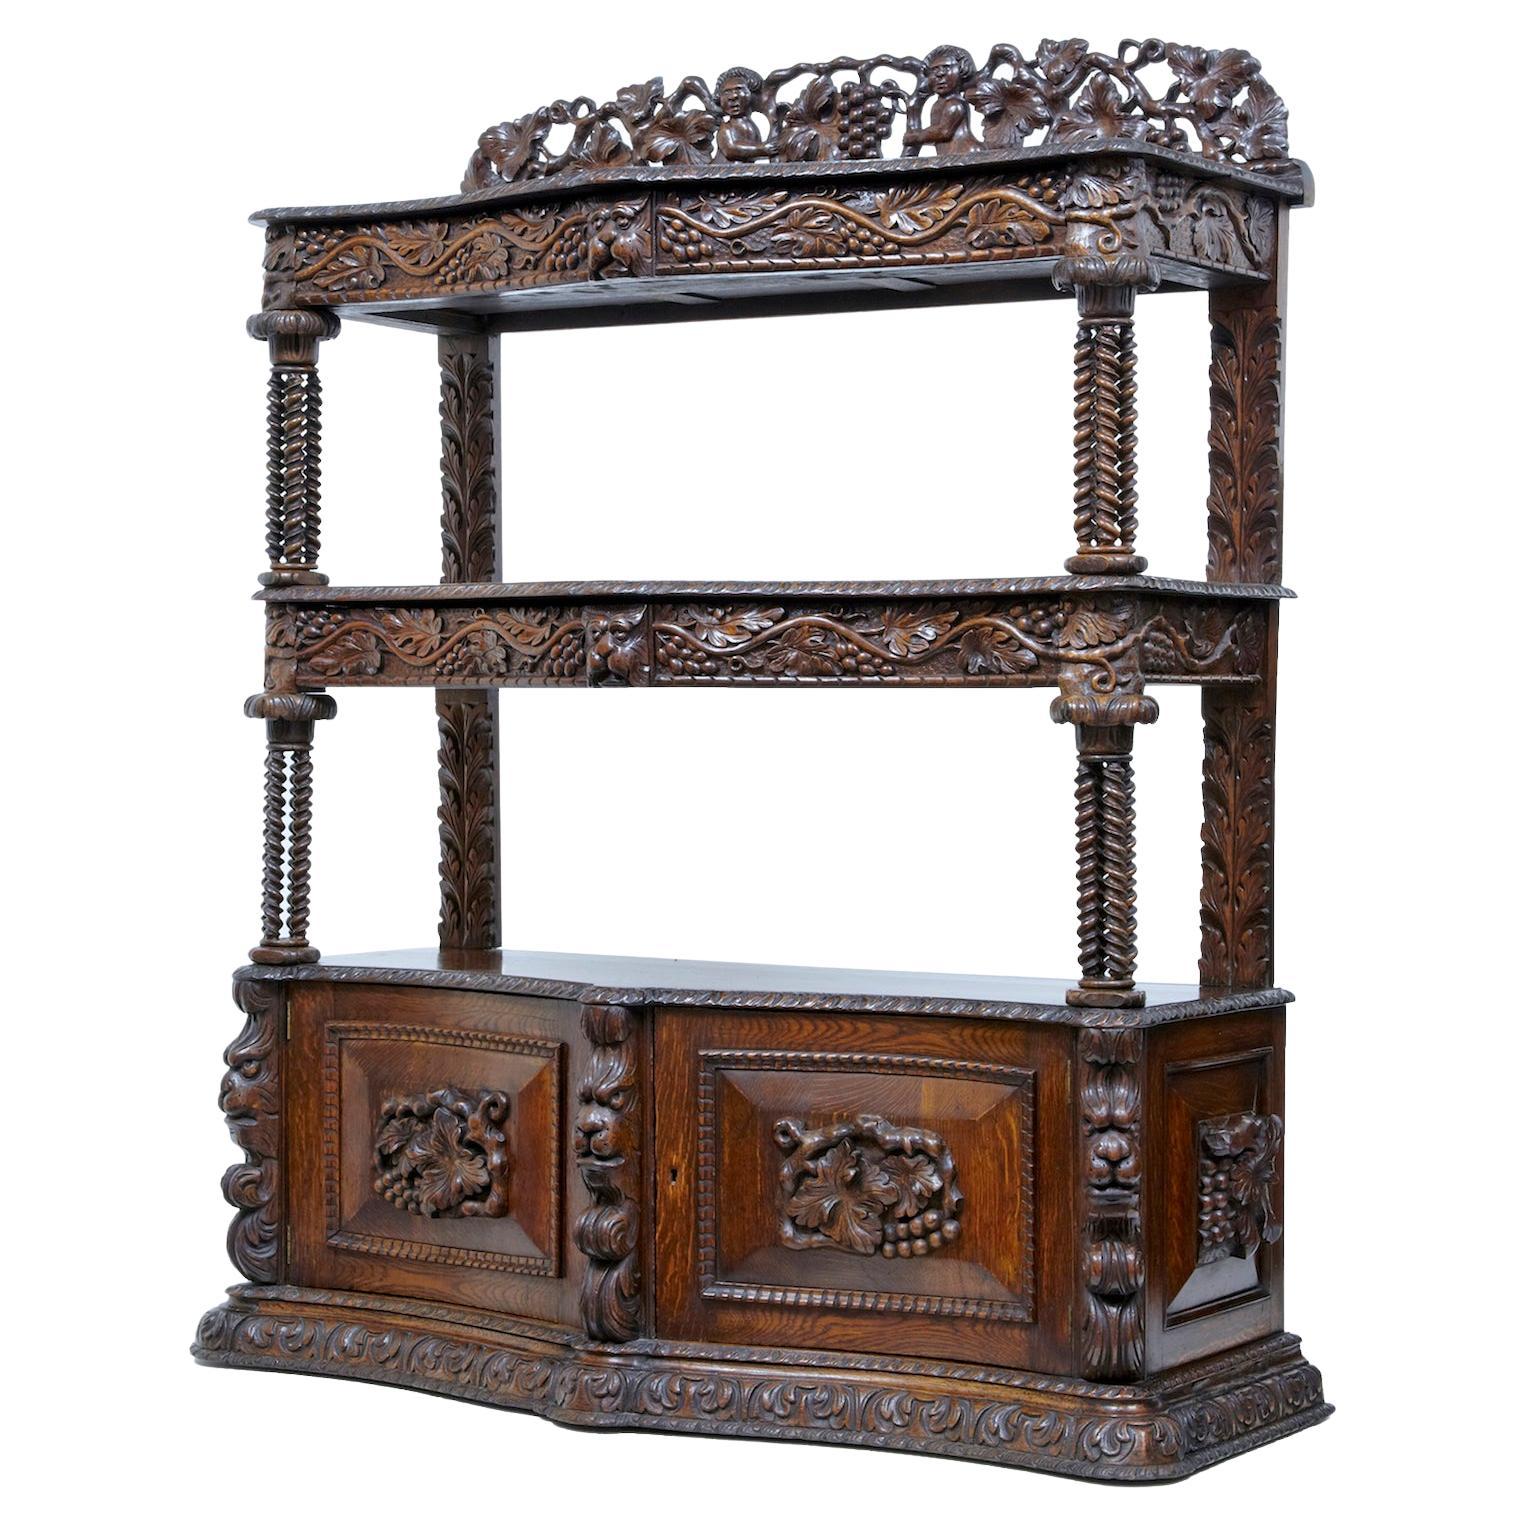 19th century profusely carved Victorian oak buffet